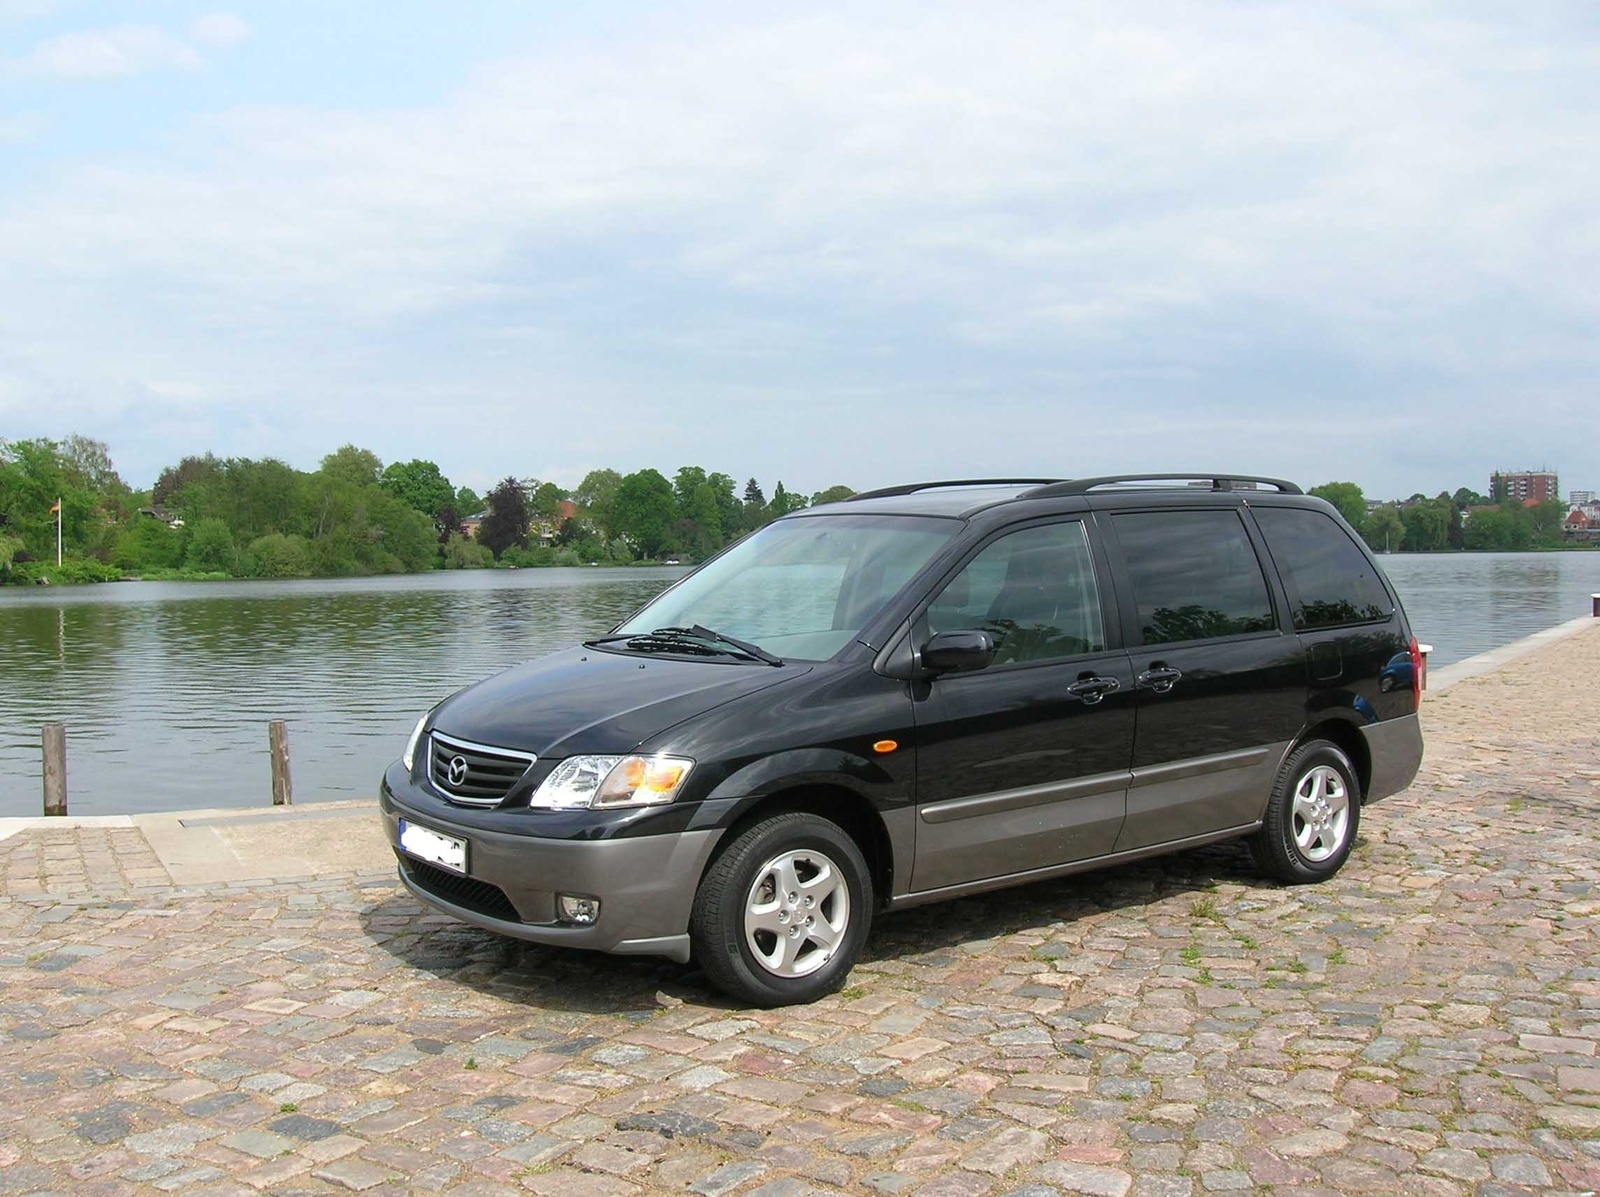 2004 Mazda MPV: Prices, Reviews & Pictures - CarGurus